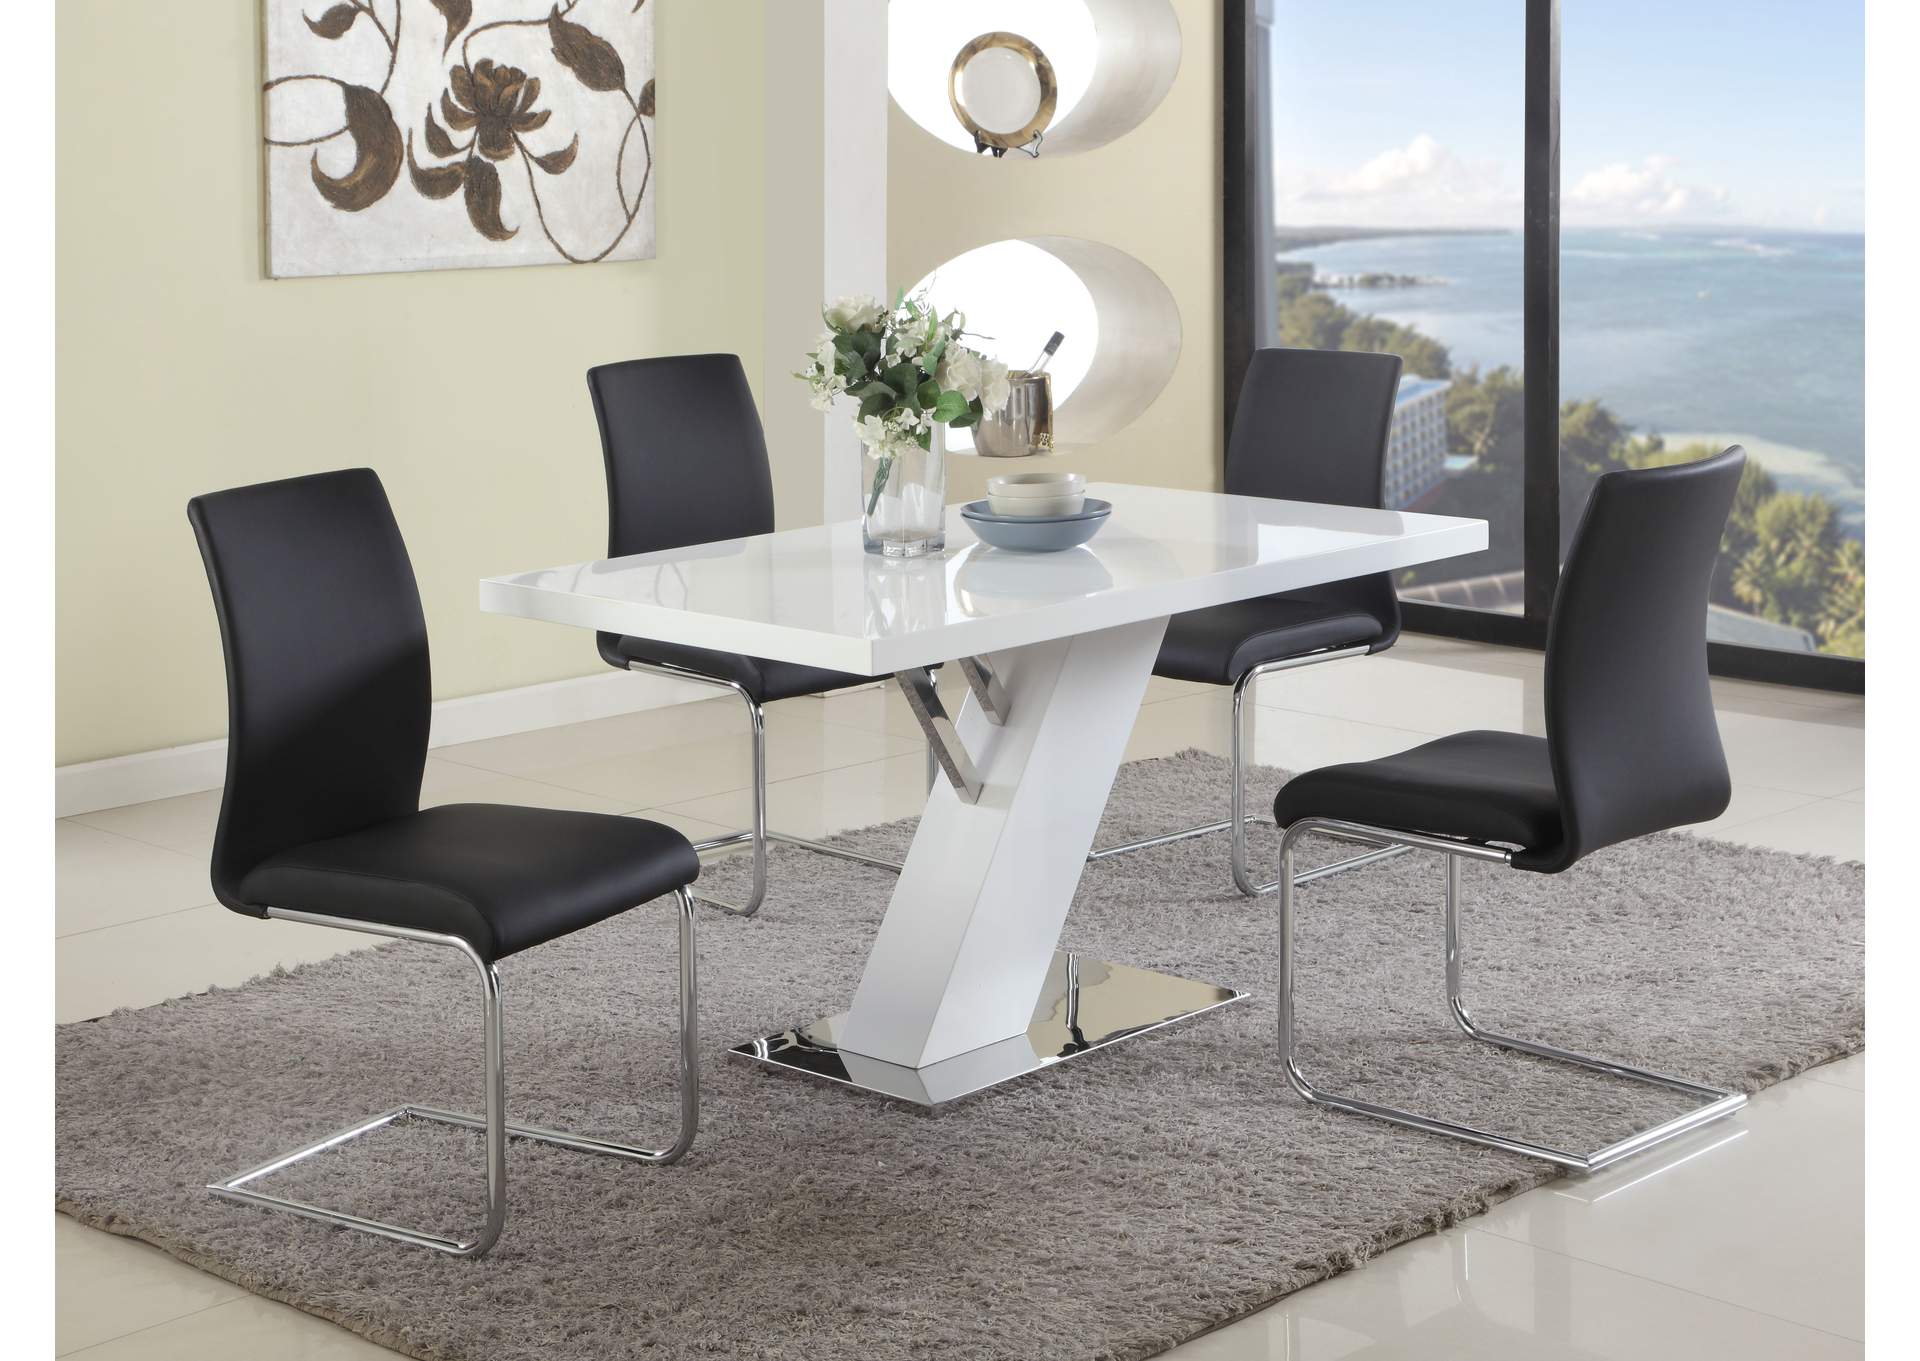 Contemporary Dining Set w/ White Gloss Table & Black Upholstered Chairs,Chintaly Imports